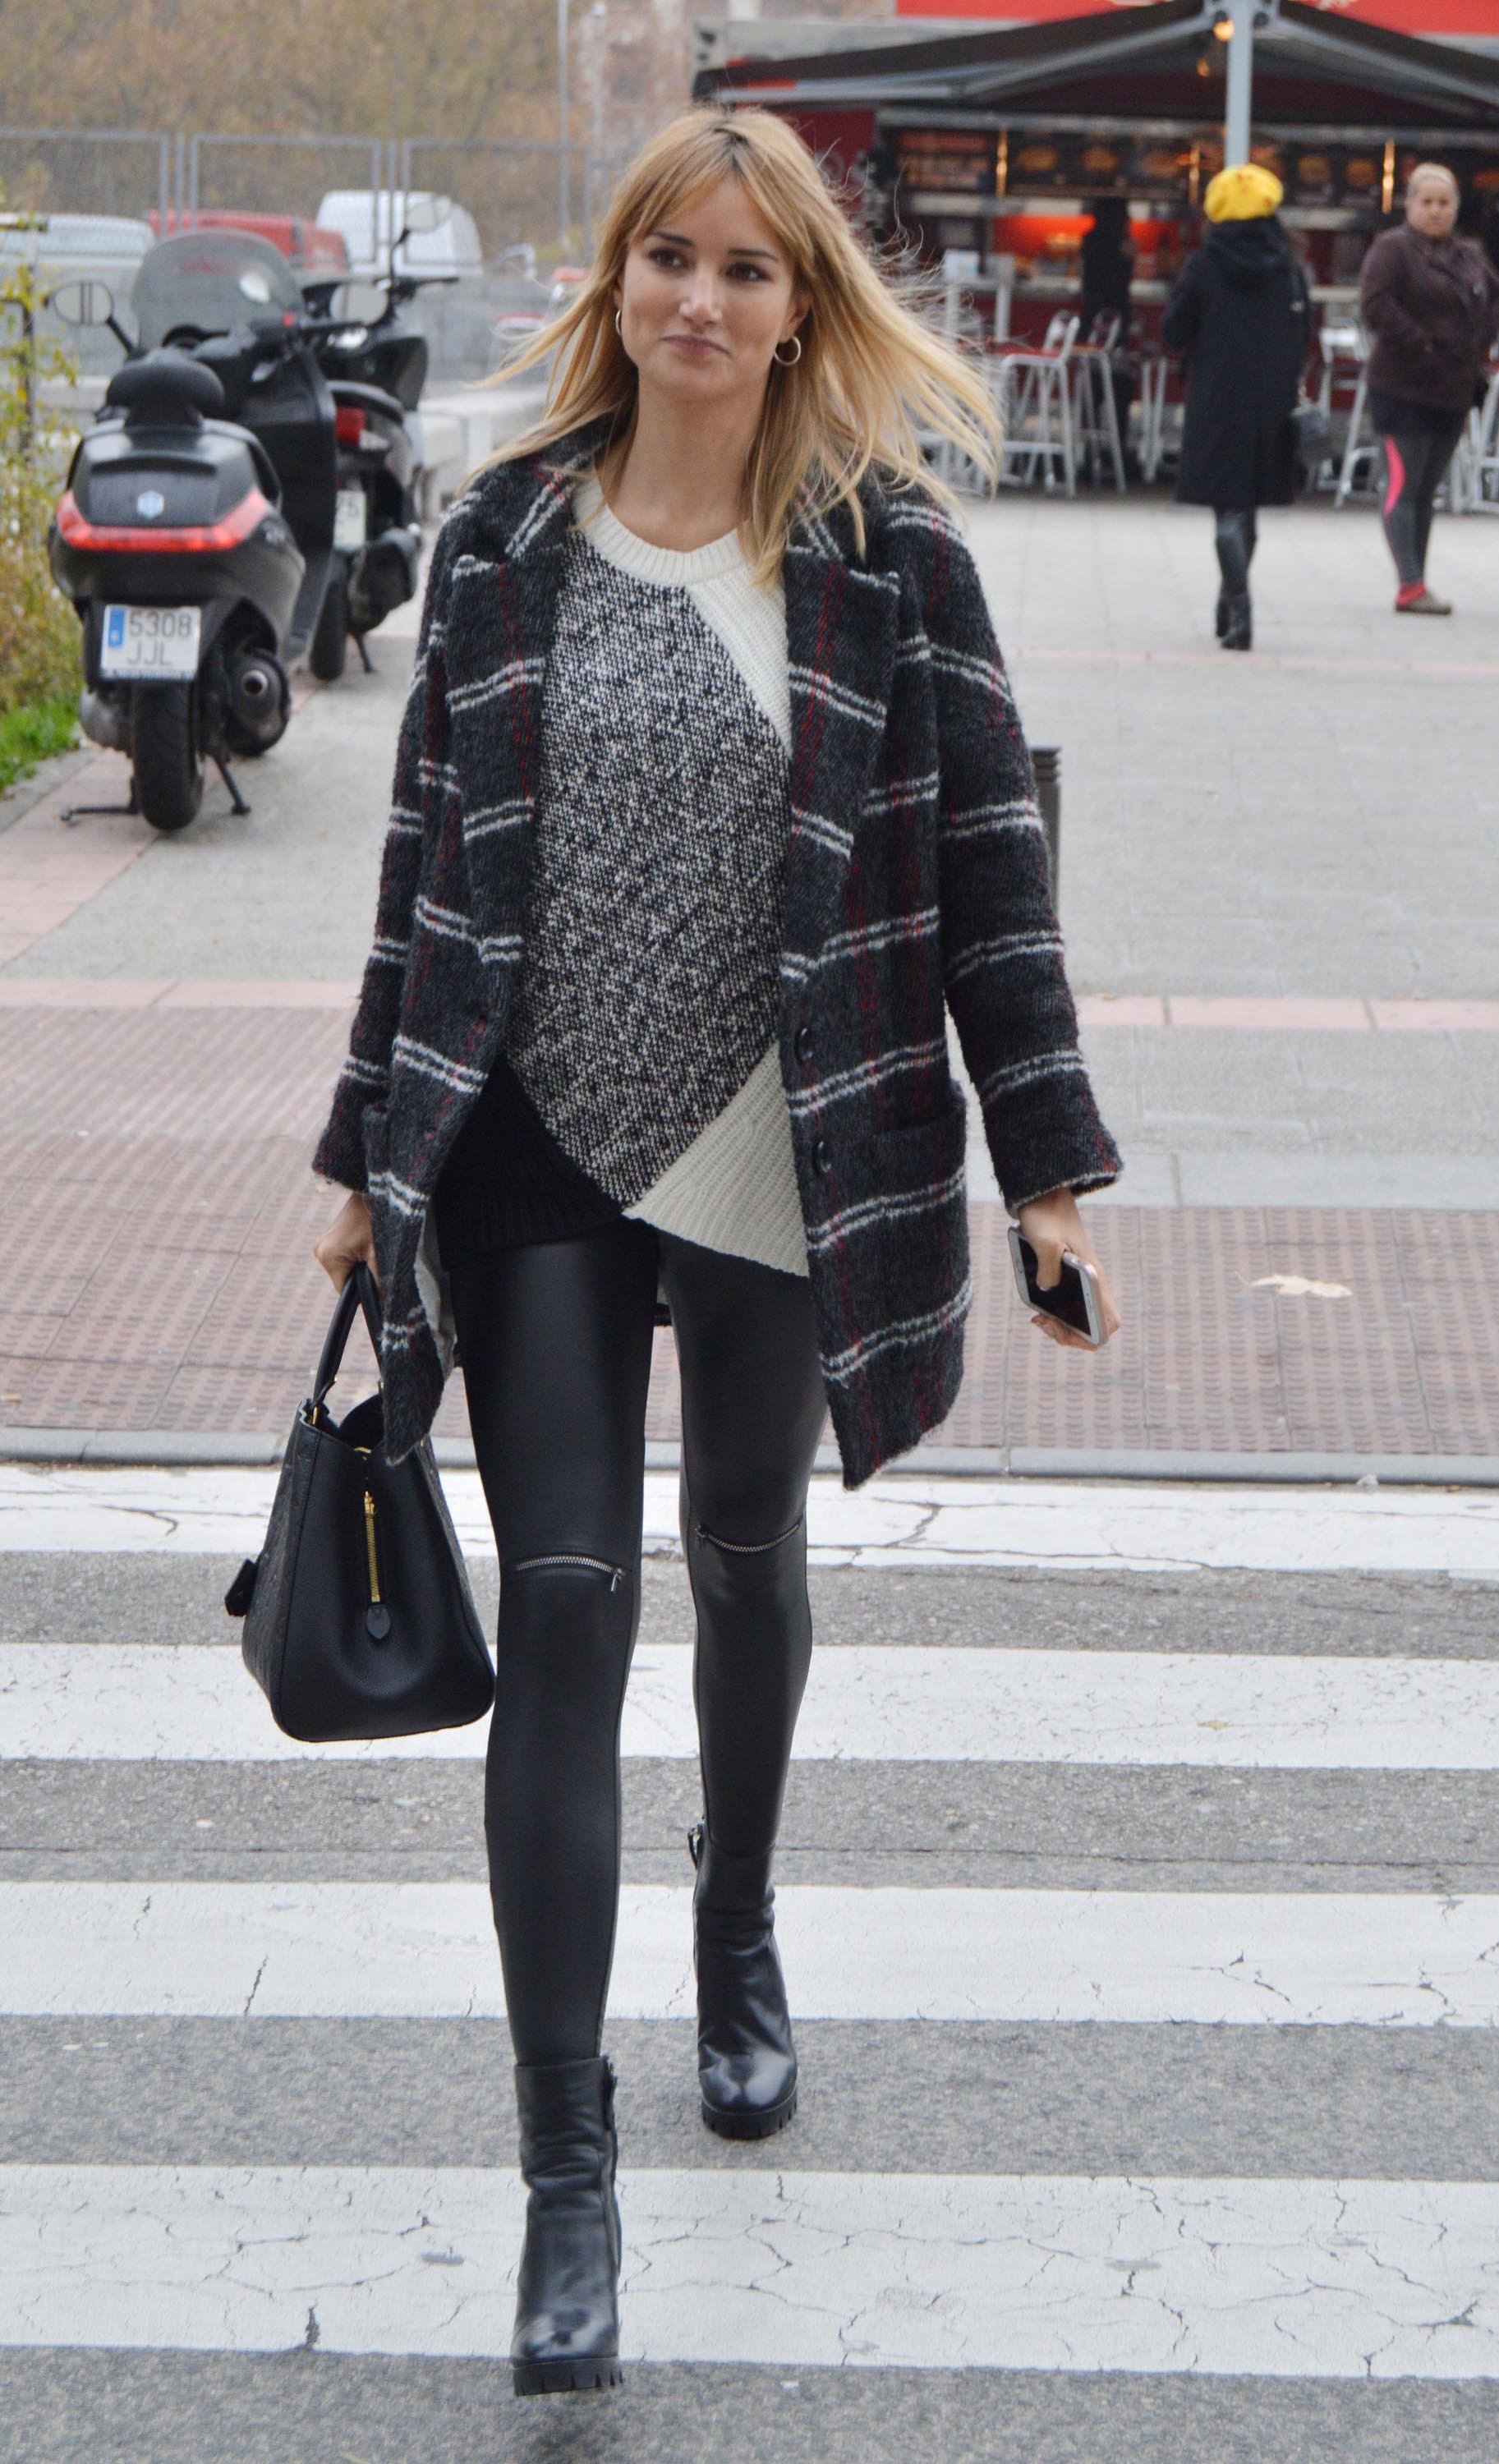 Alba Carrillo is seen in Madrid